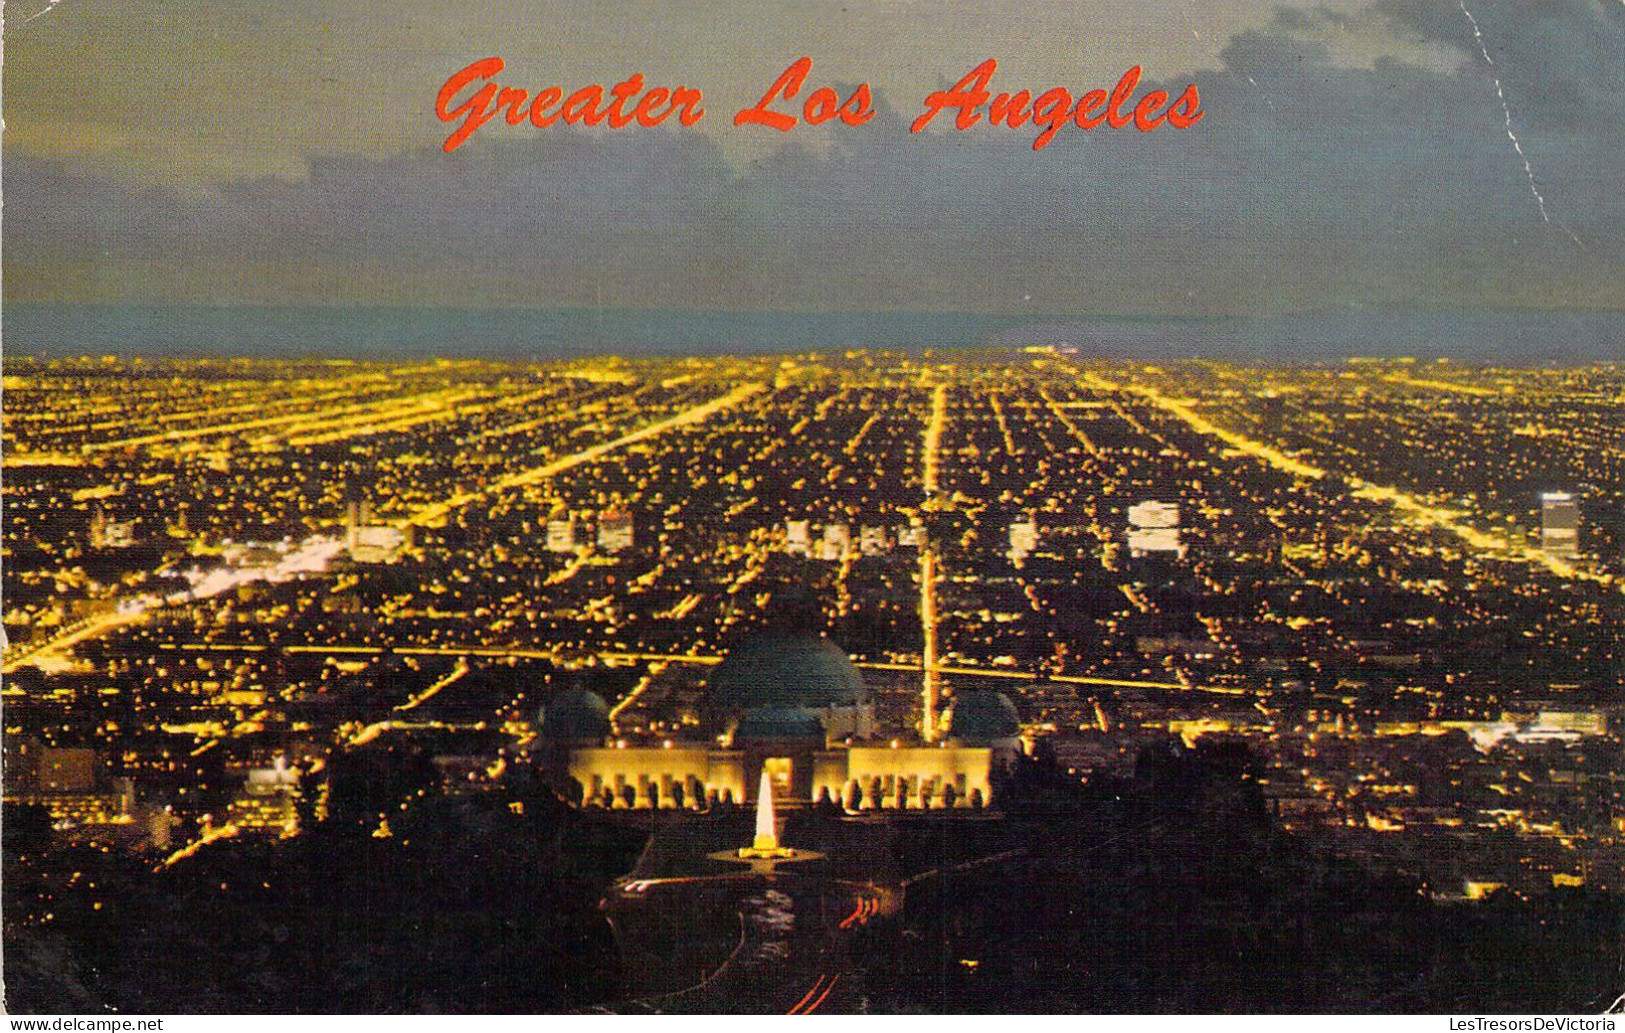 USA - Greater LOS ANGELES - Carte Postale Ancienne - Los Angeles